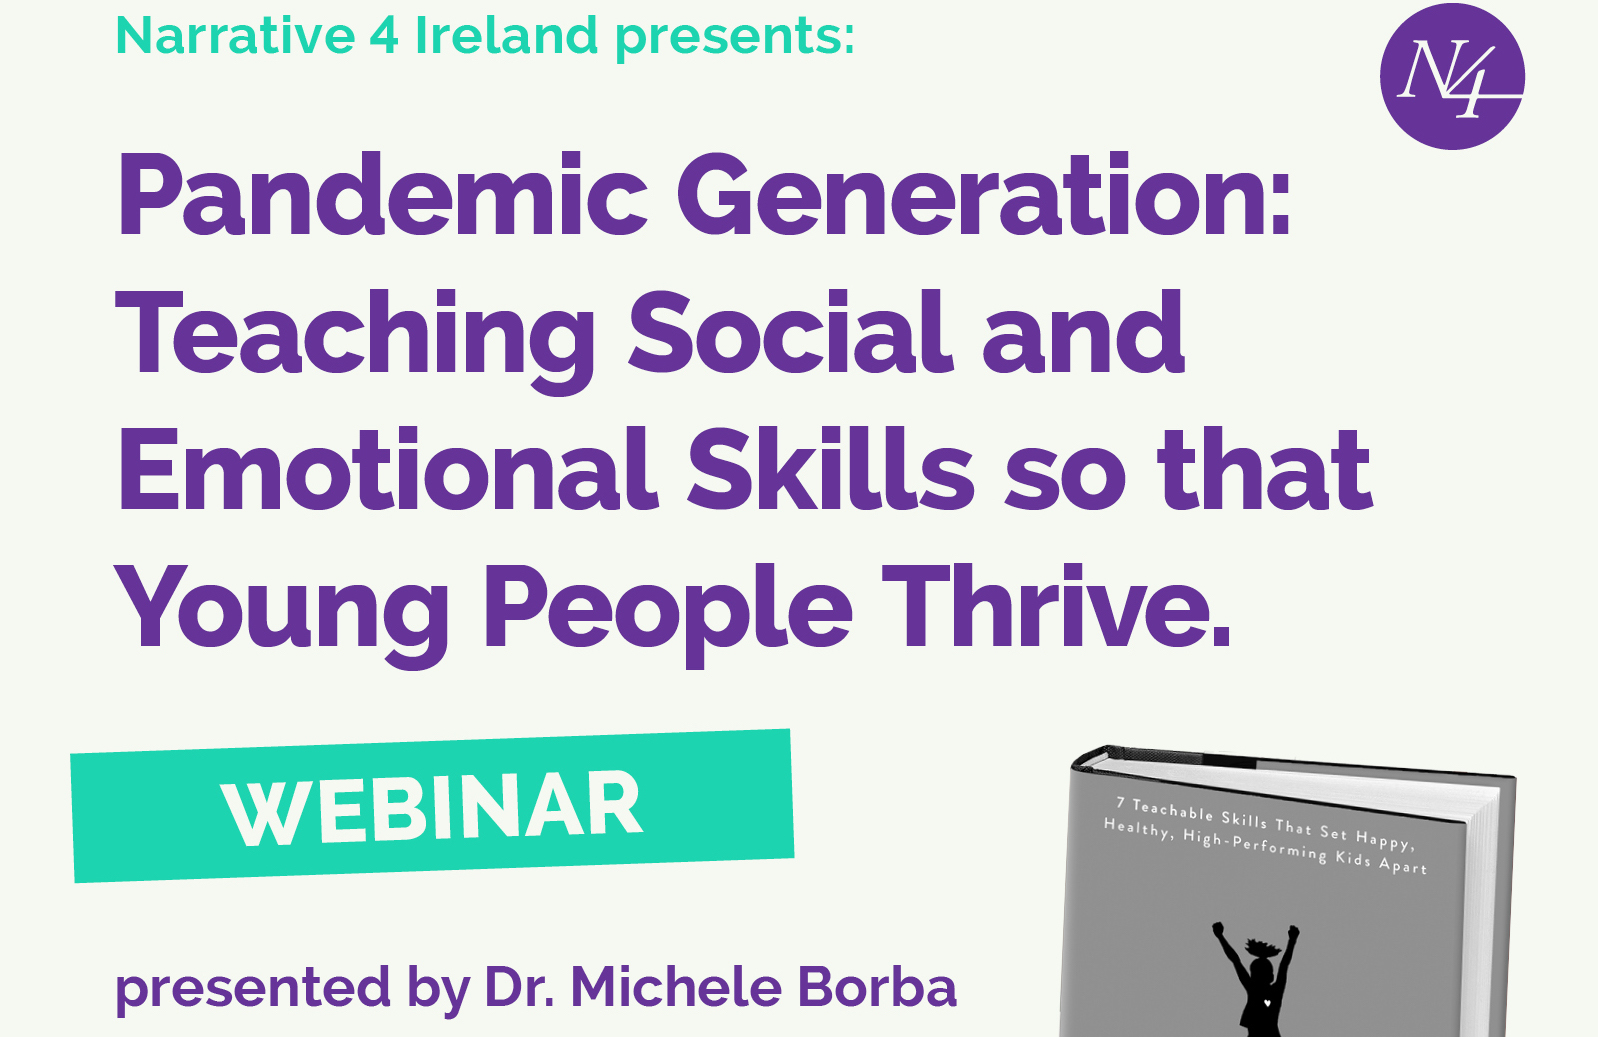 Dr Michele Borba will host a webinar ‘Pandemic Generation’ with Narrative 4 Ireland on May 6th, focusing on teaching the youth vital skills to thrive and flourish.